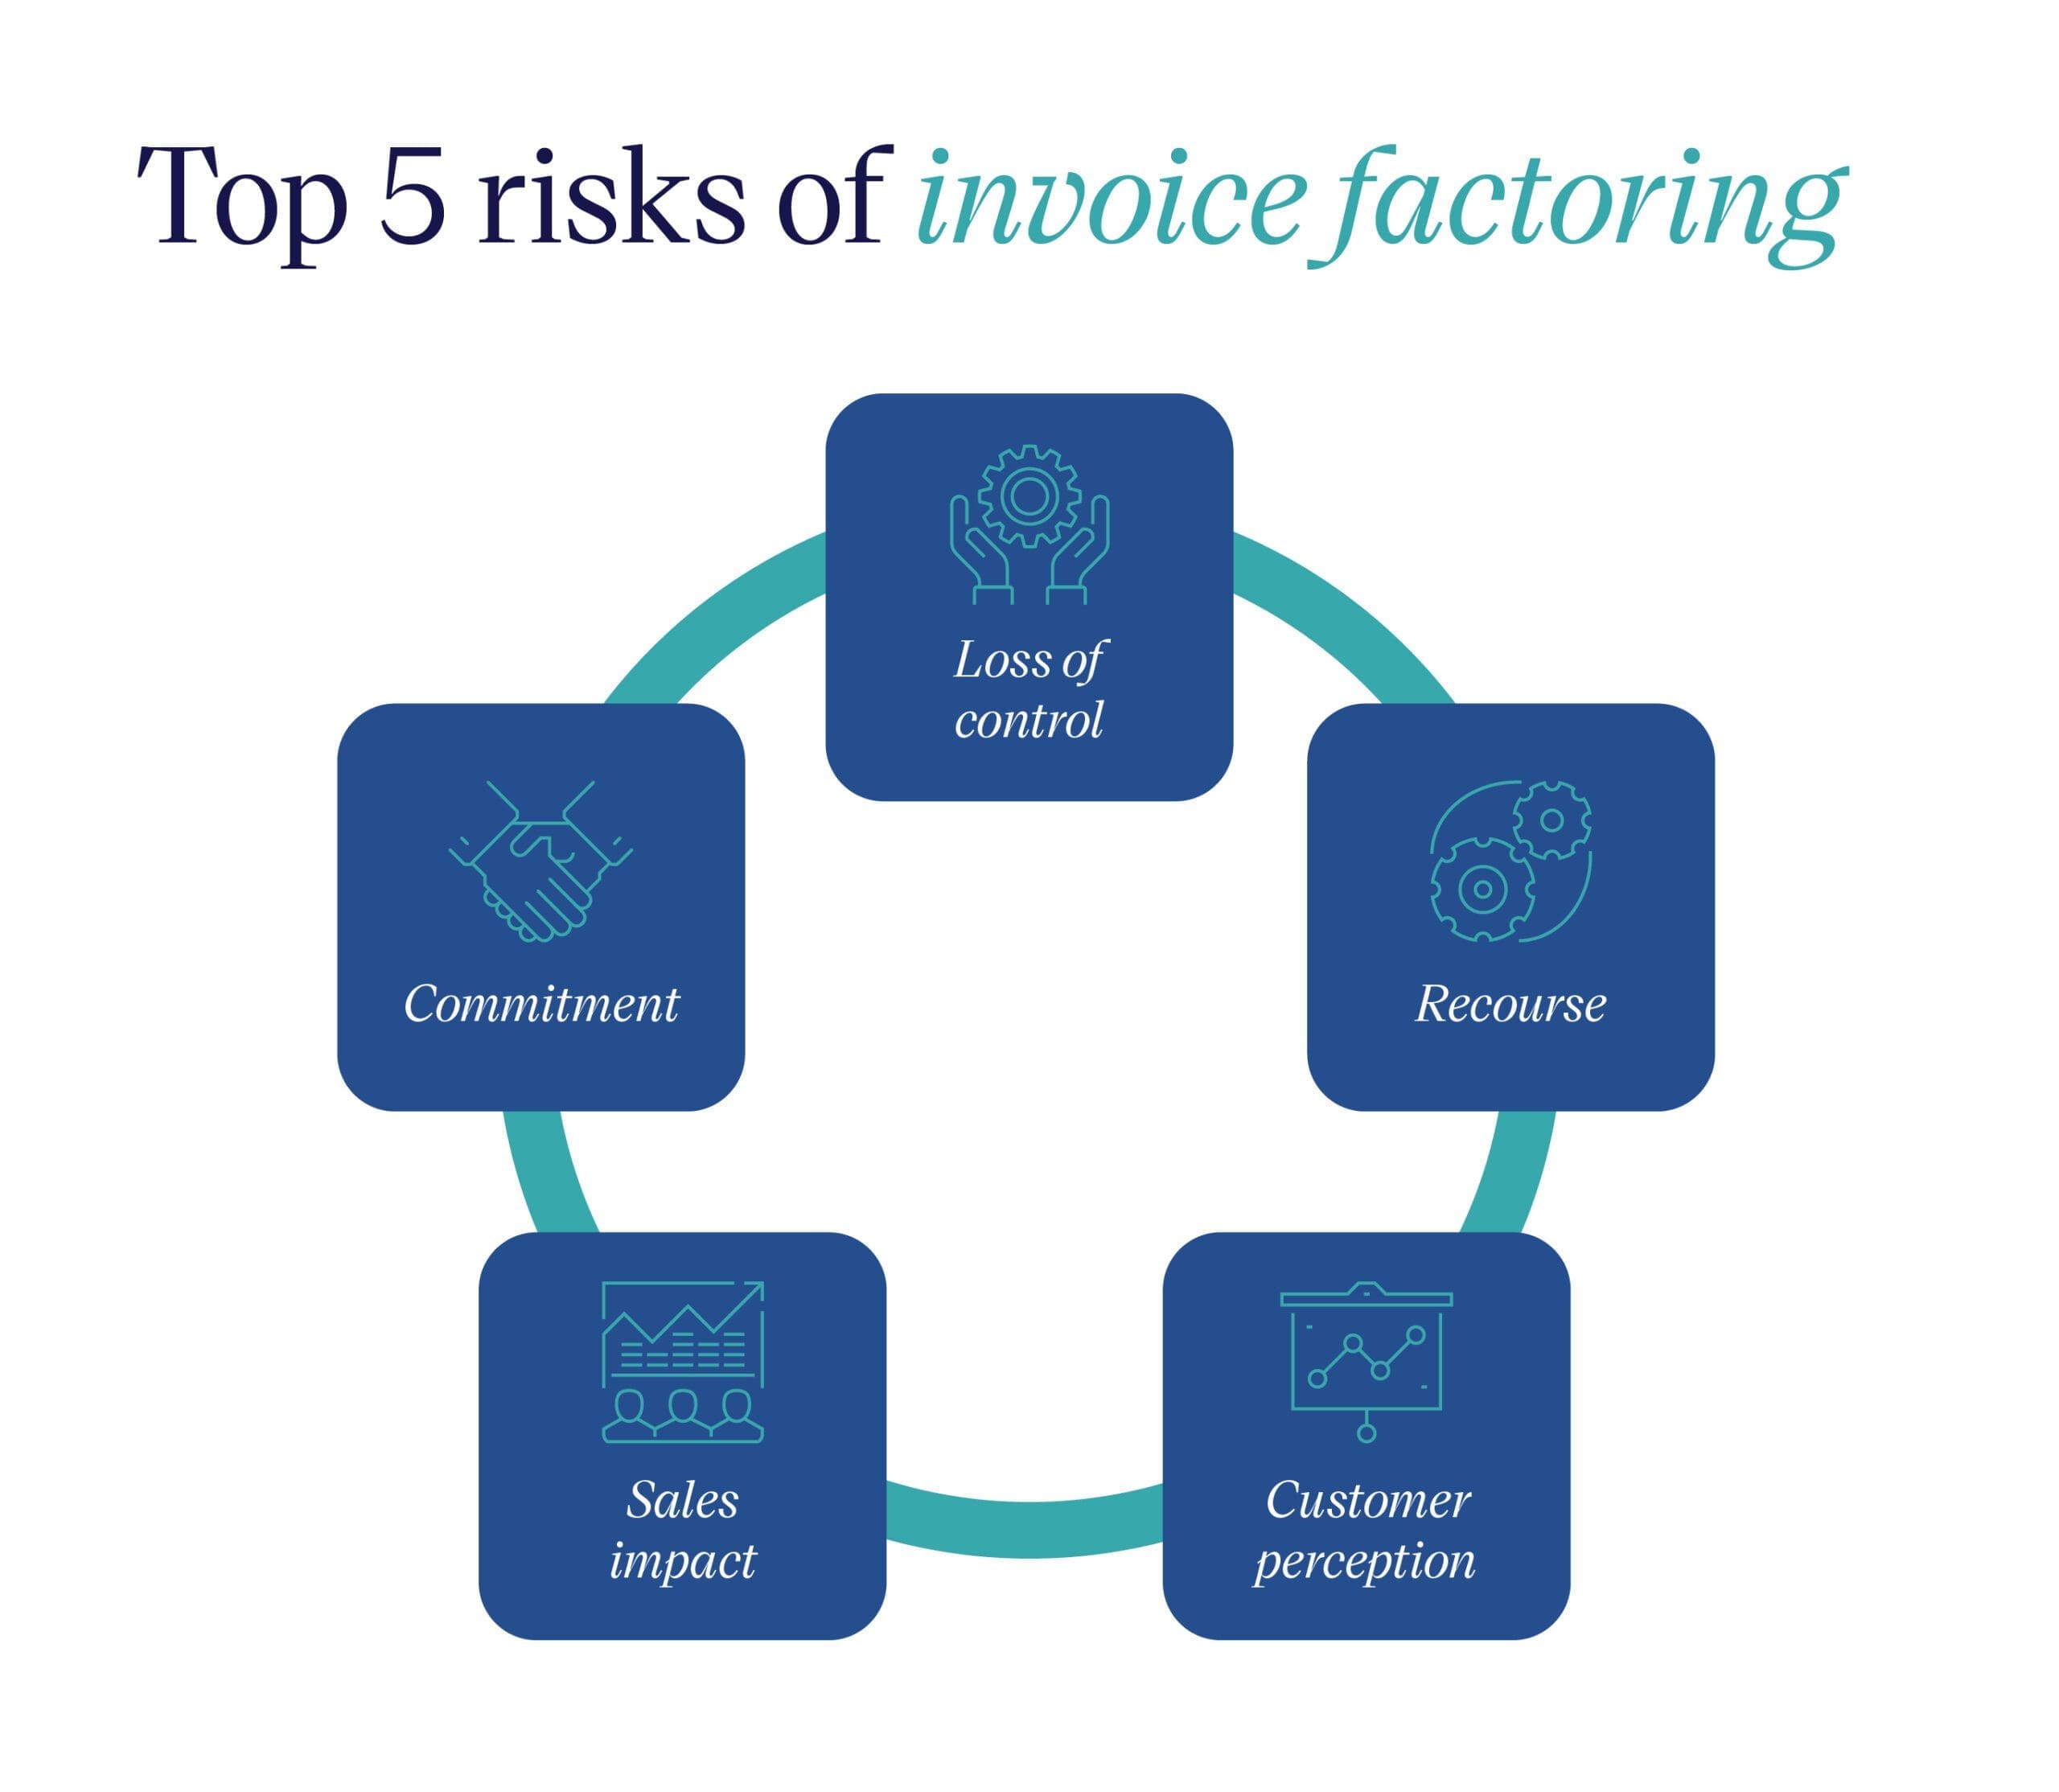 Top 5 invoice factoring risks including loss of control, recourse, customer perception, sales impact, and commitment.